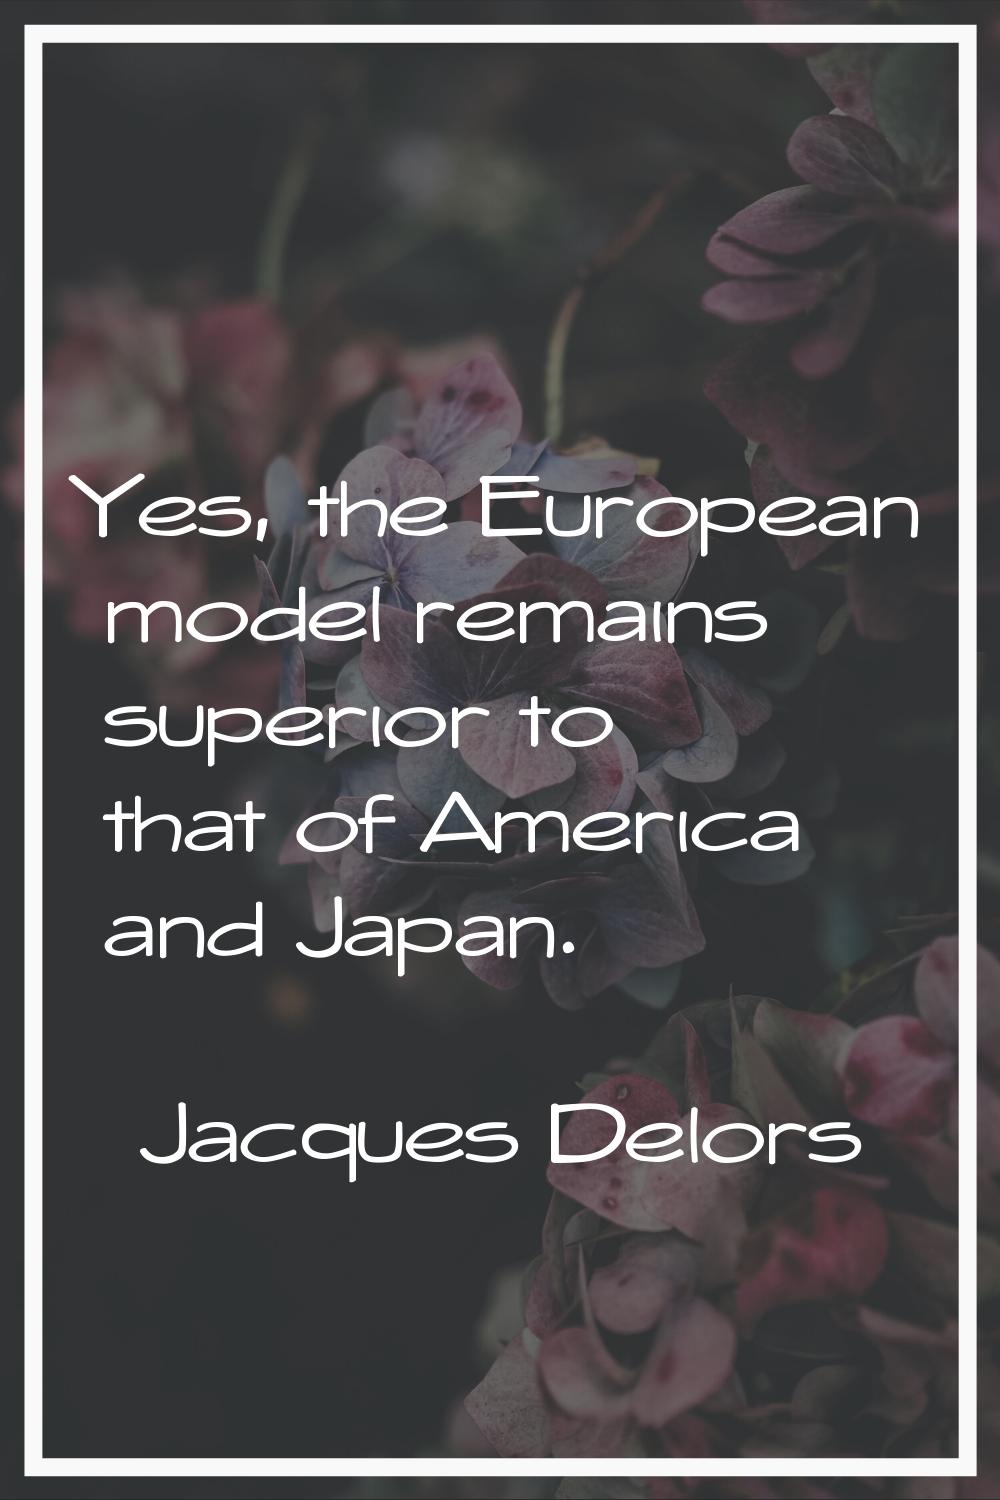 Yes, the European model remains superior to that of America and Japan.